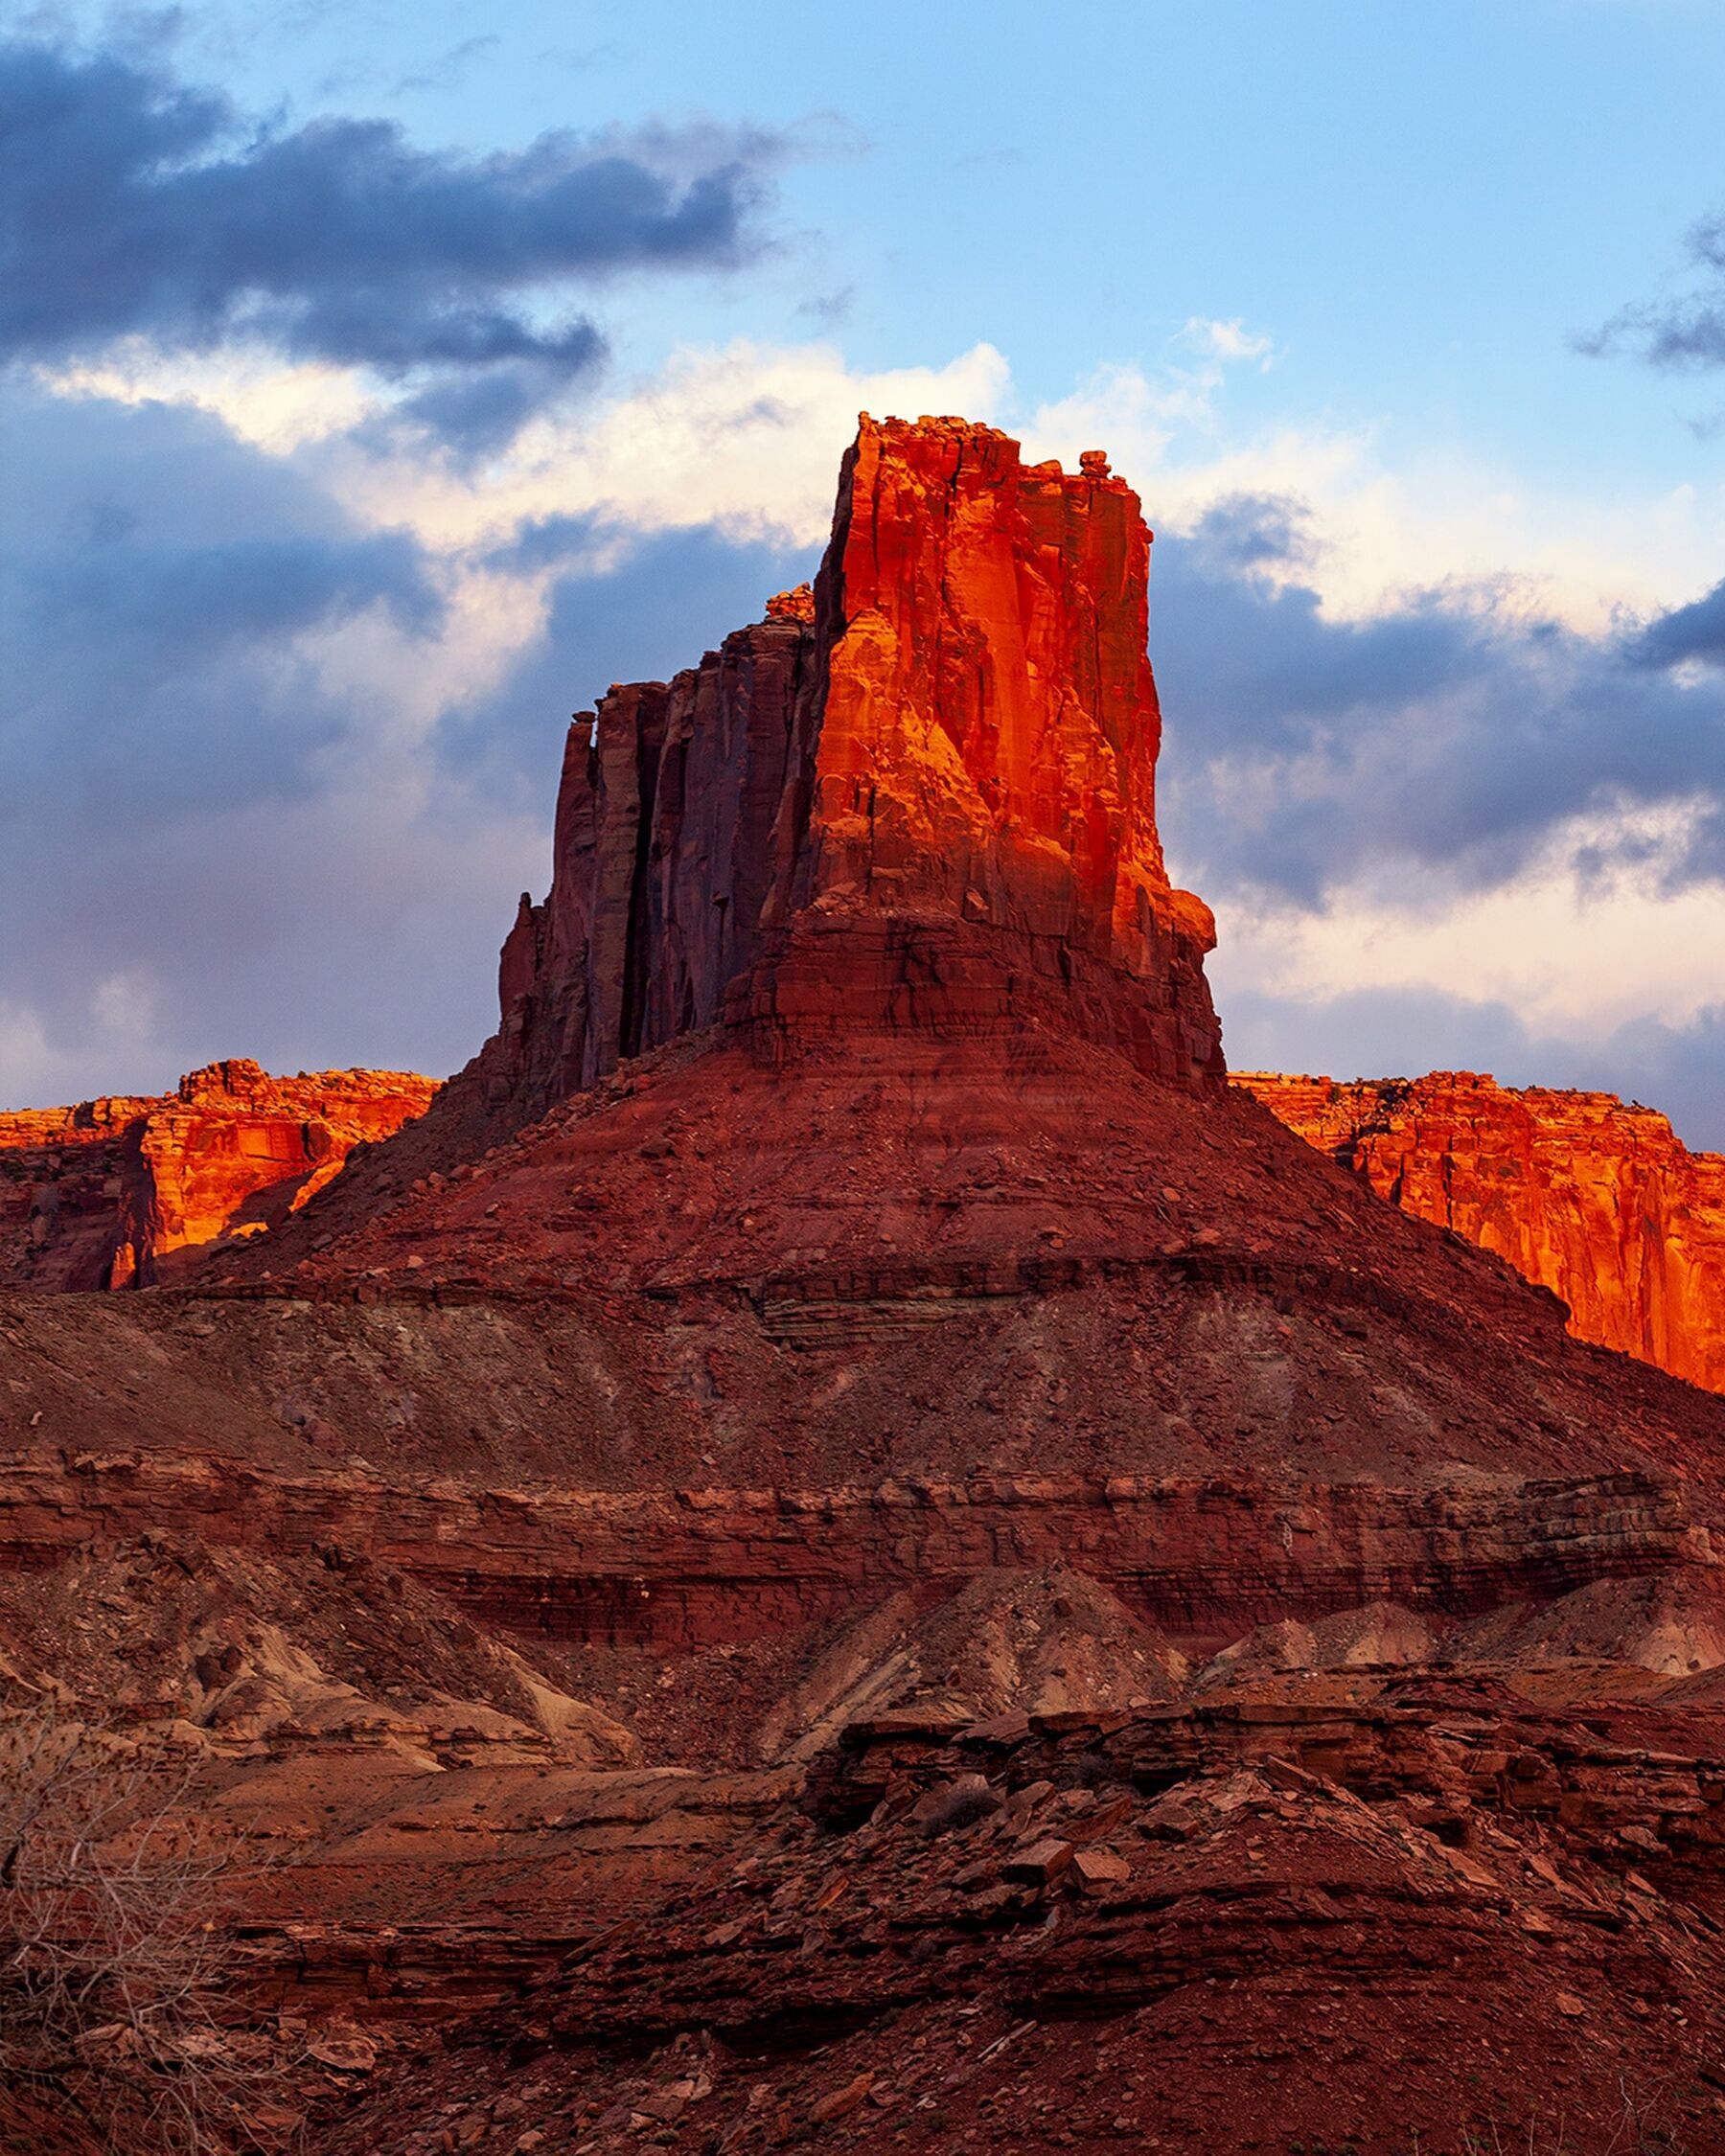 Sandstone tower lit by the setting sun in Canyonlands National Park, Utah